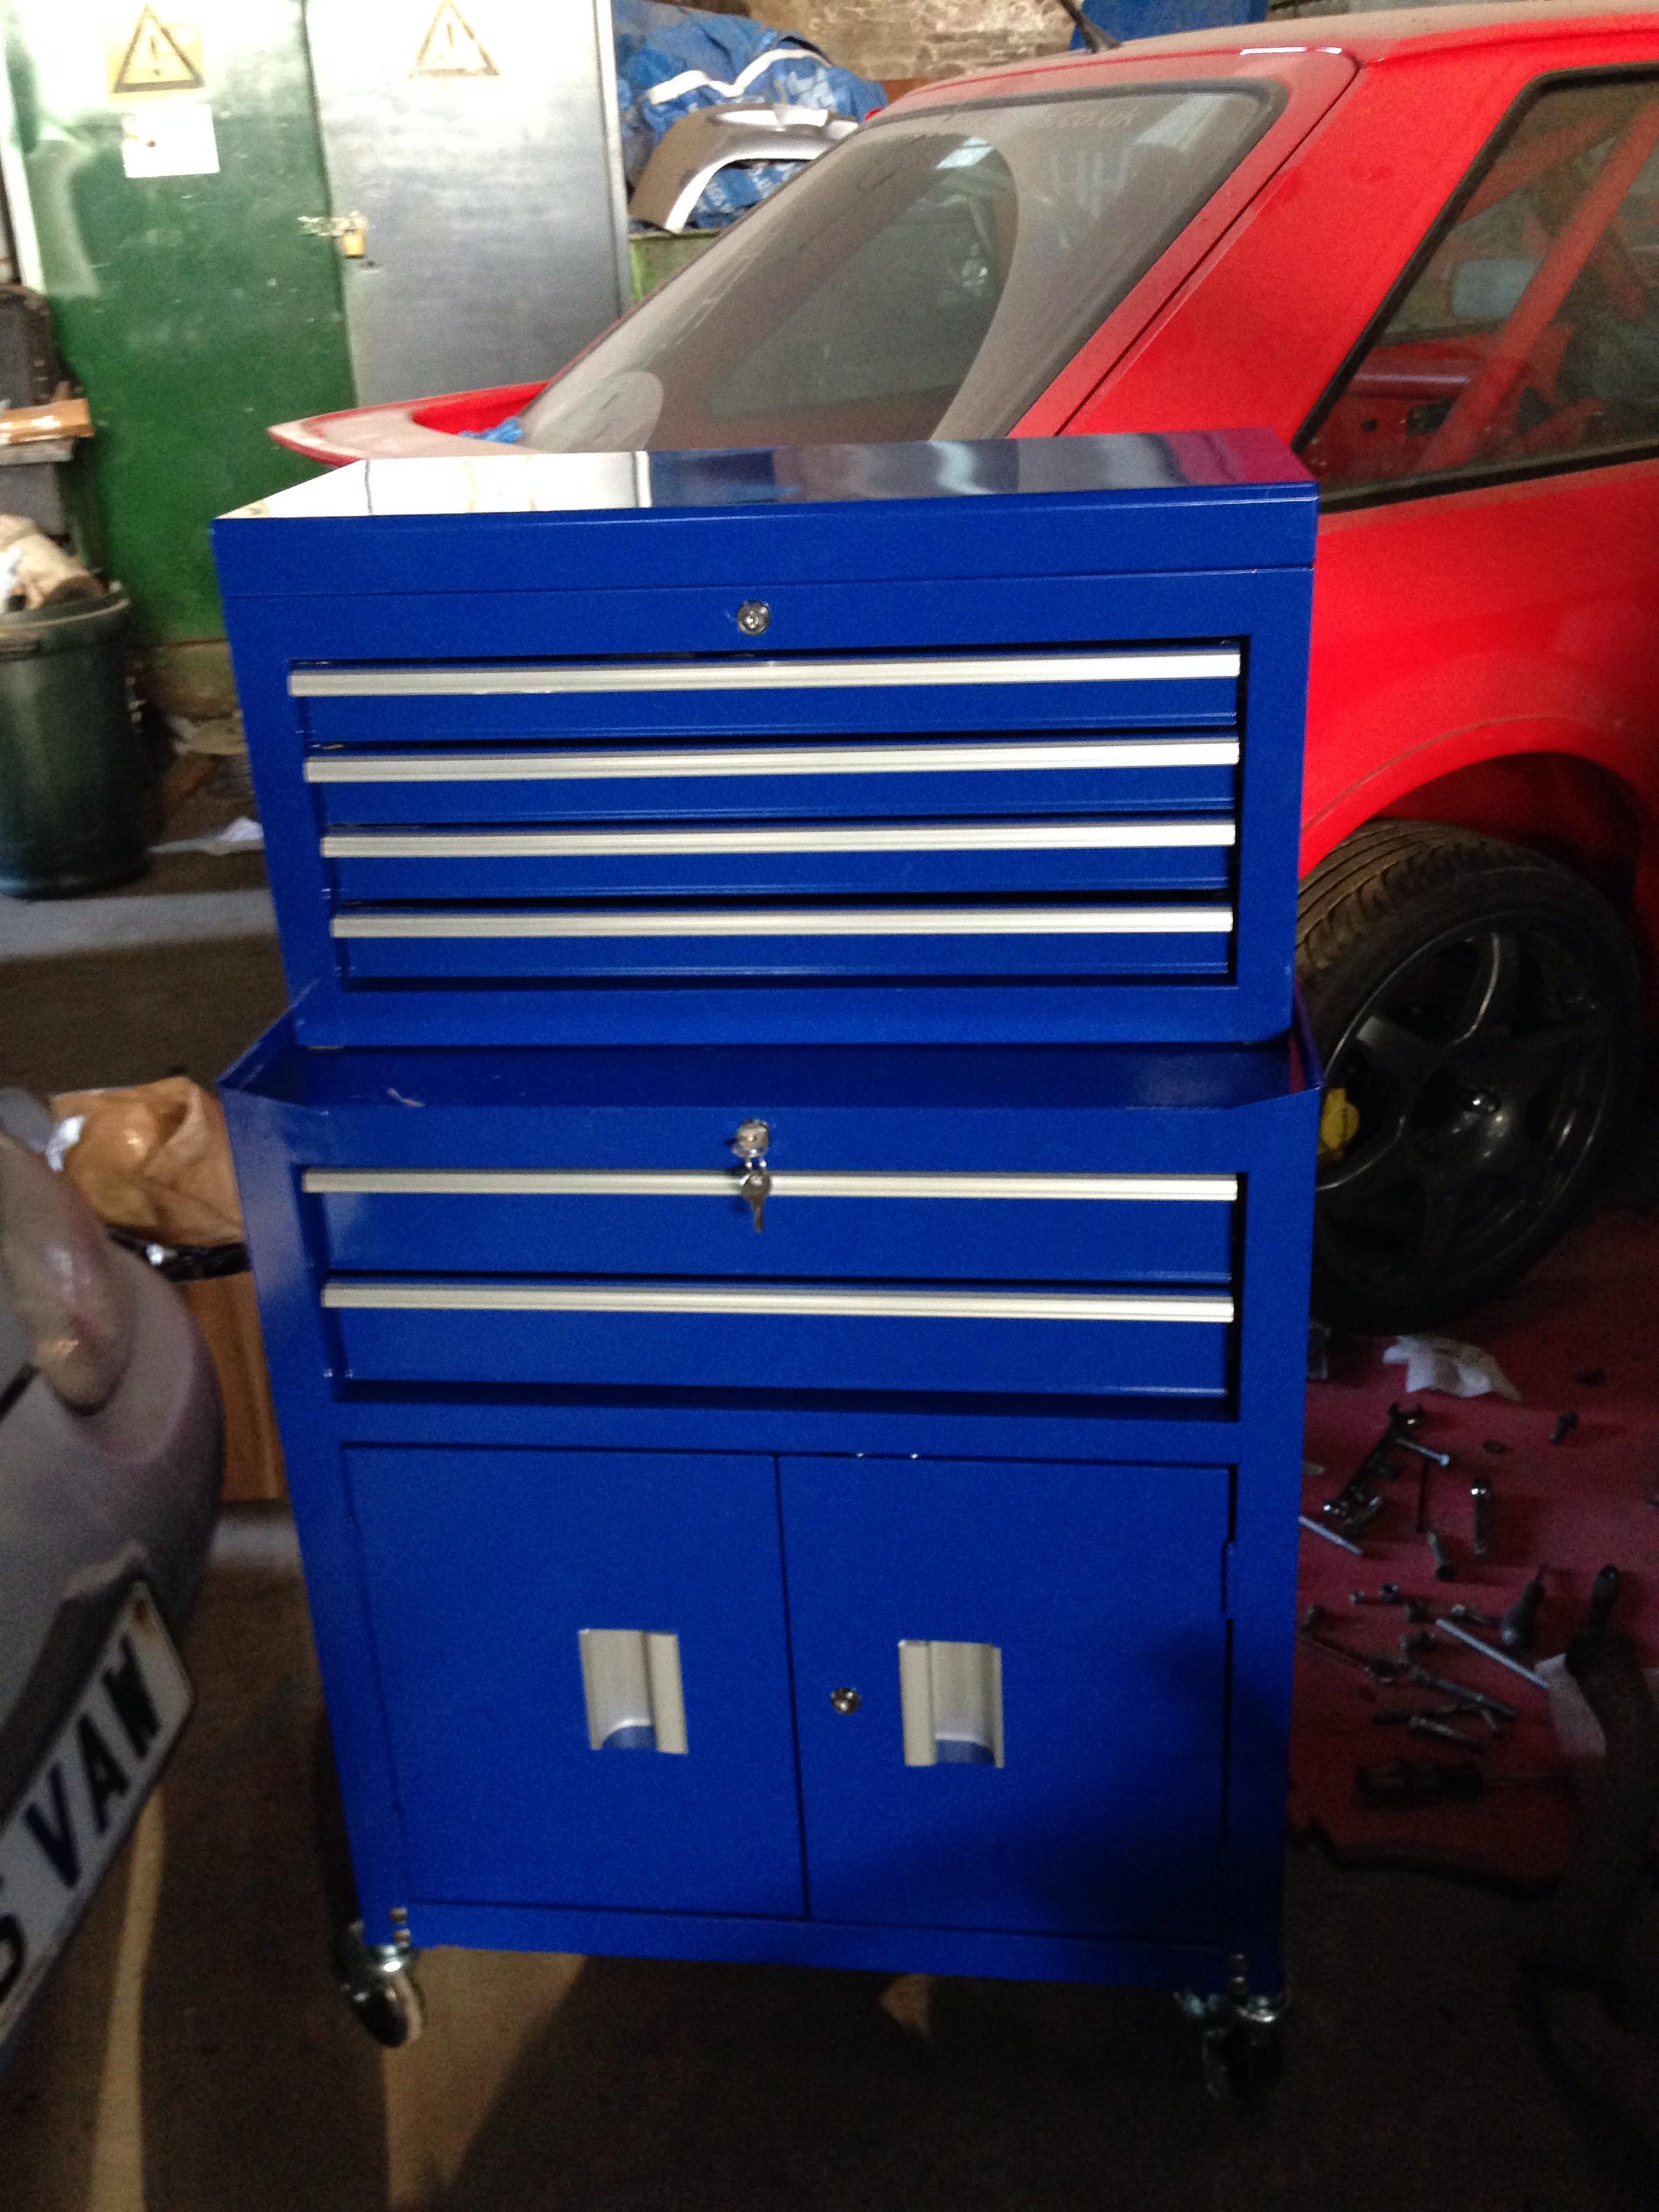 https://passionford.com/forum/attachments/general-car-related-discussion/60749d1501384660-cheap-tool-box-this-weekend-at-halfords-image_zps60038dc7.jpg